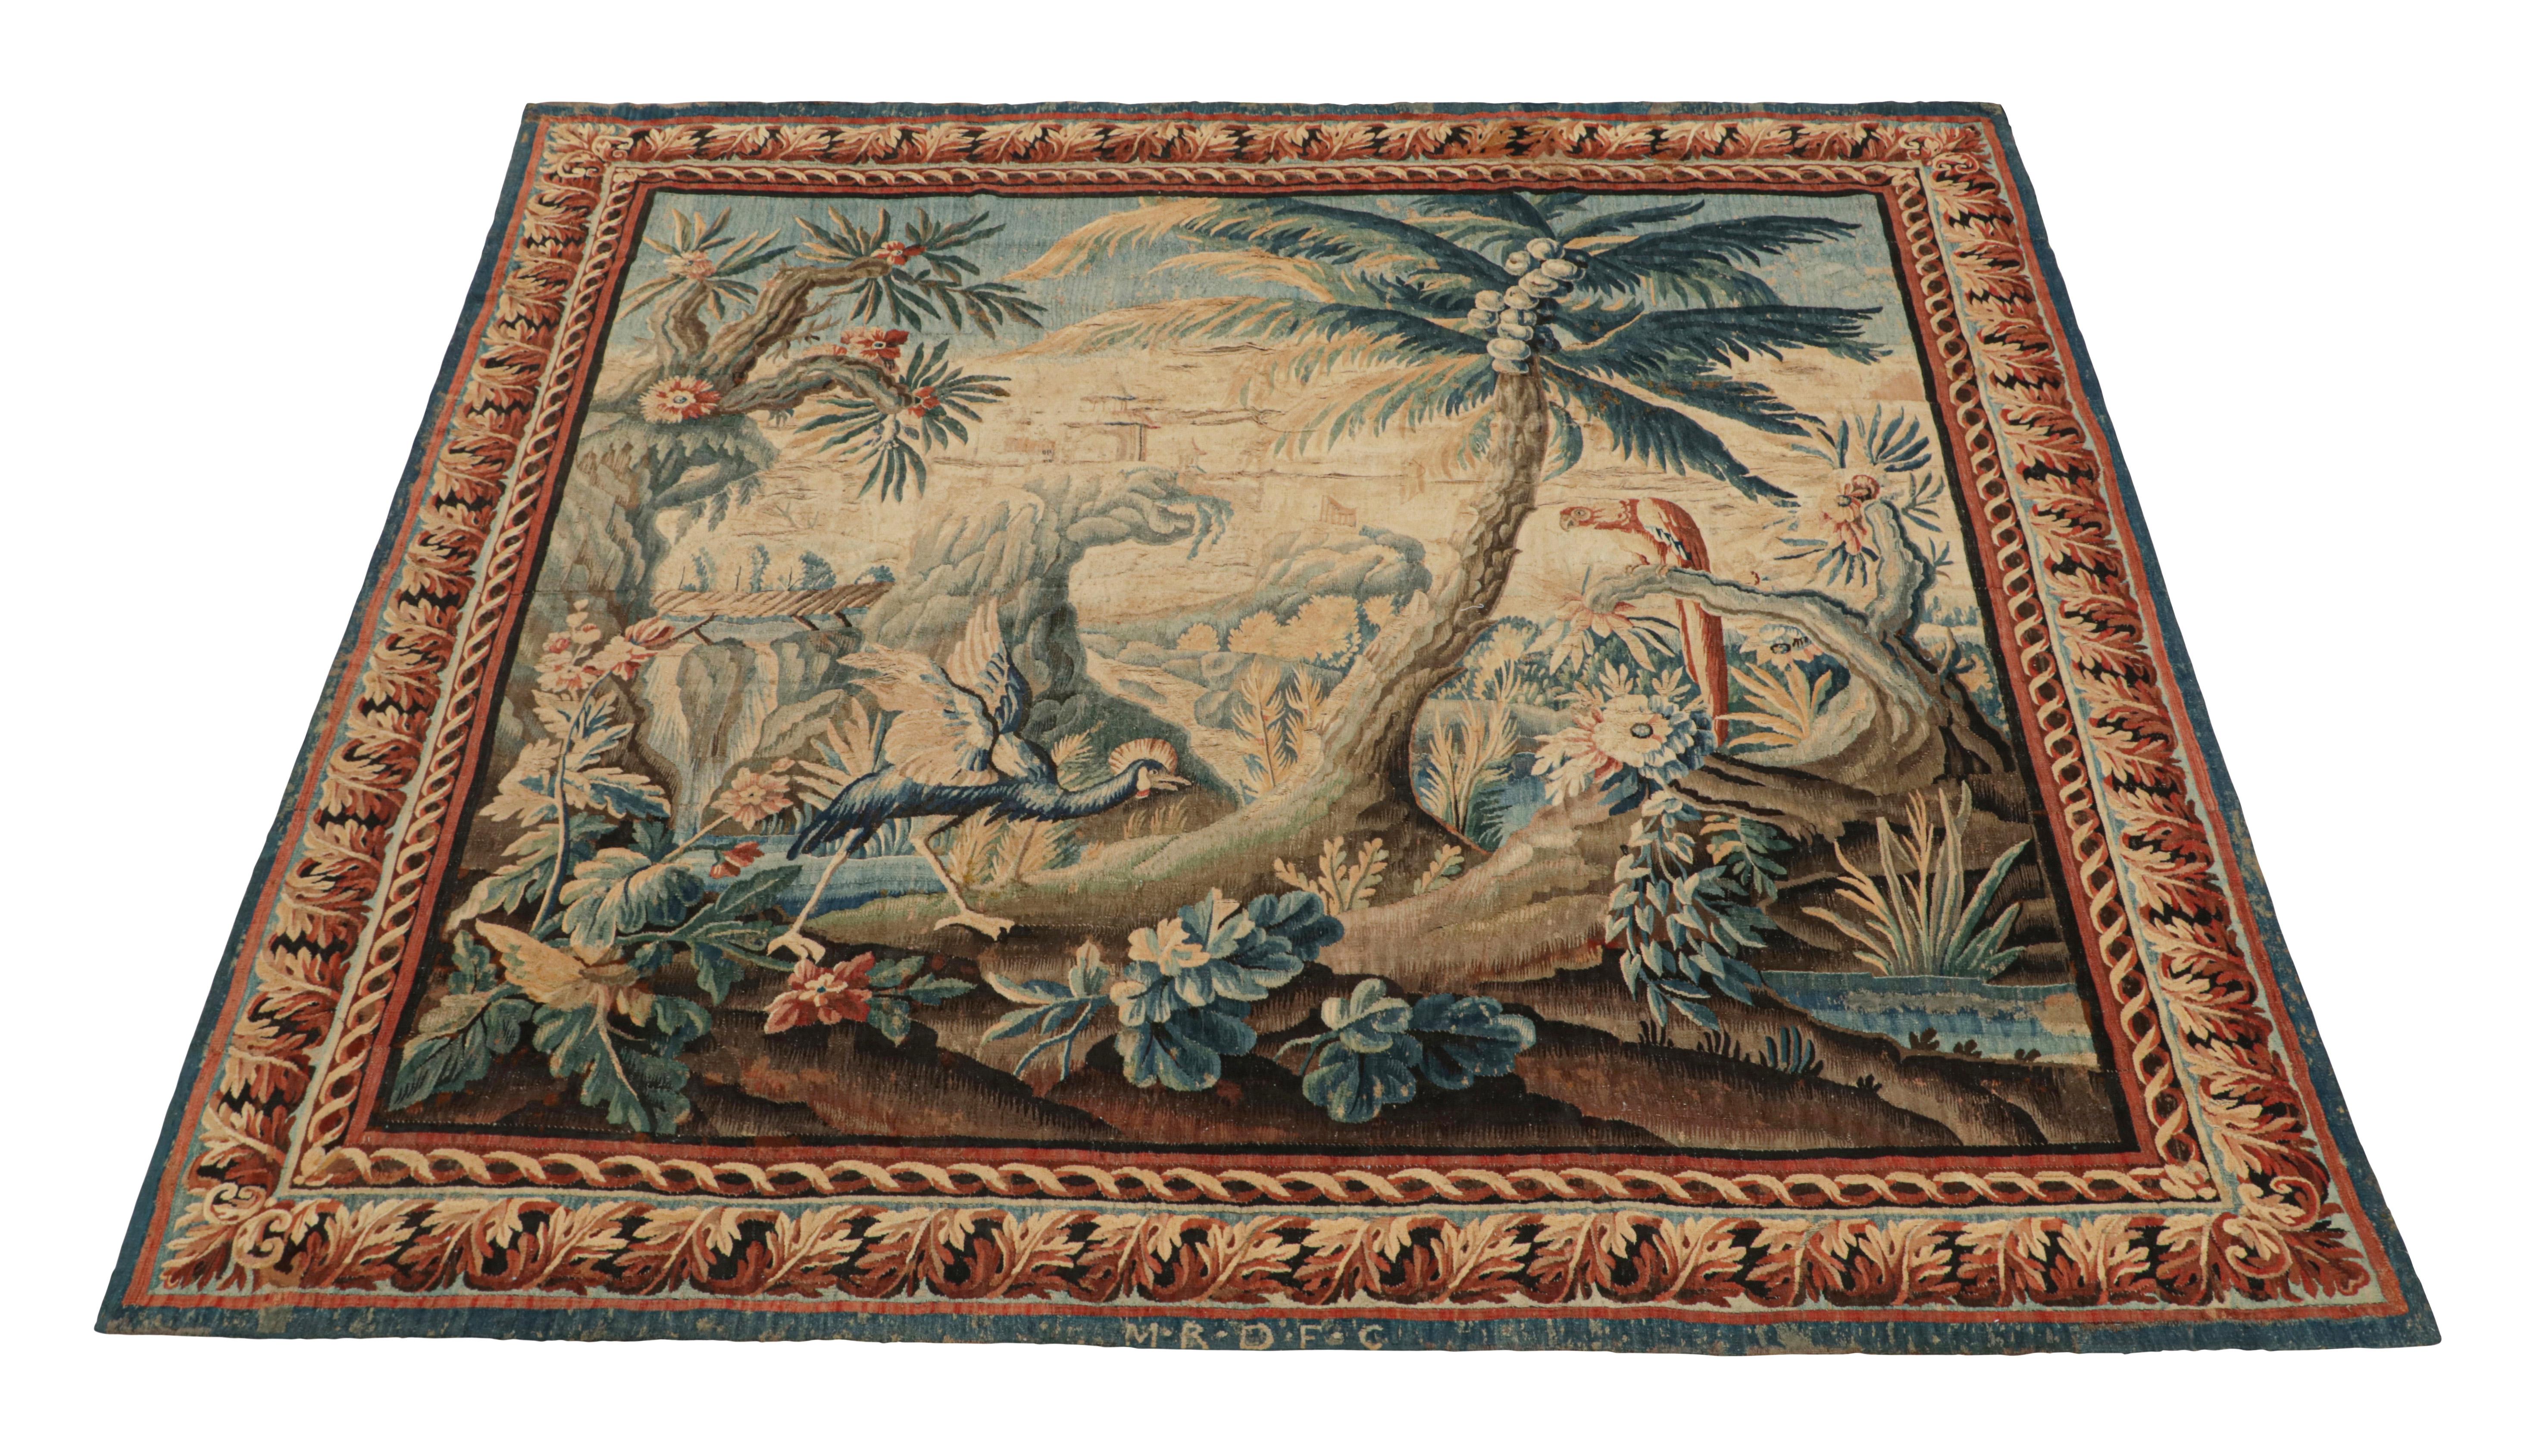 An antique 10x10 pictorial tapestry from France, handwoven in wool circa 1650-1660. This flat weave is a new addition to the most collectible European curations by Rug & Kilim. 
Further On the Design:
This 17-century Aubusson enjoys a bold